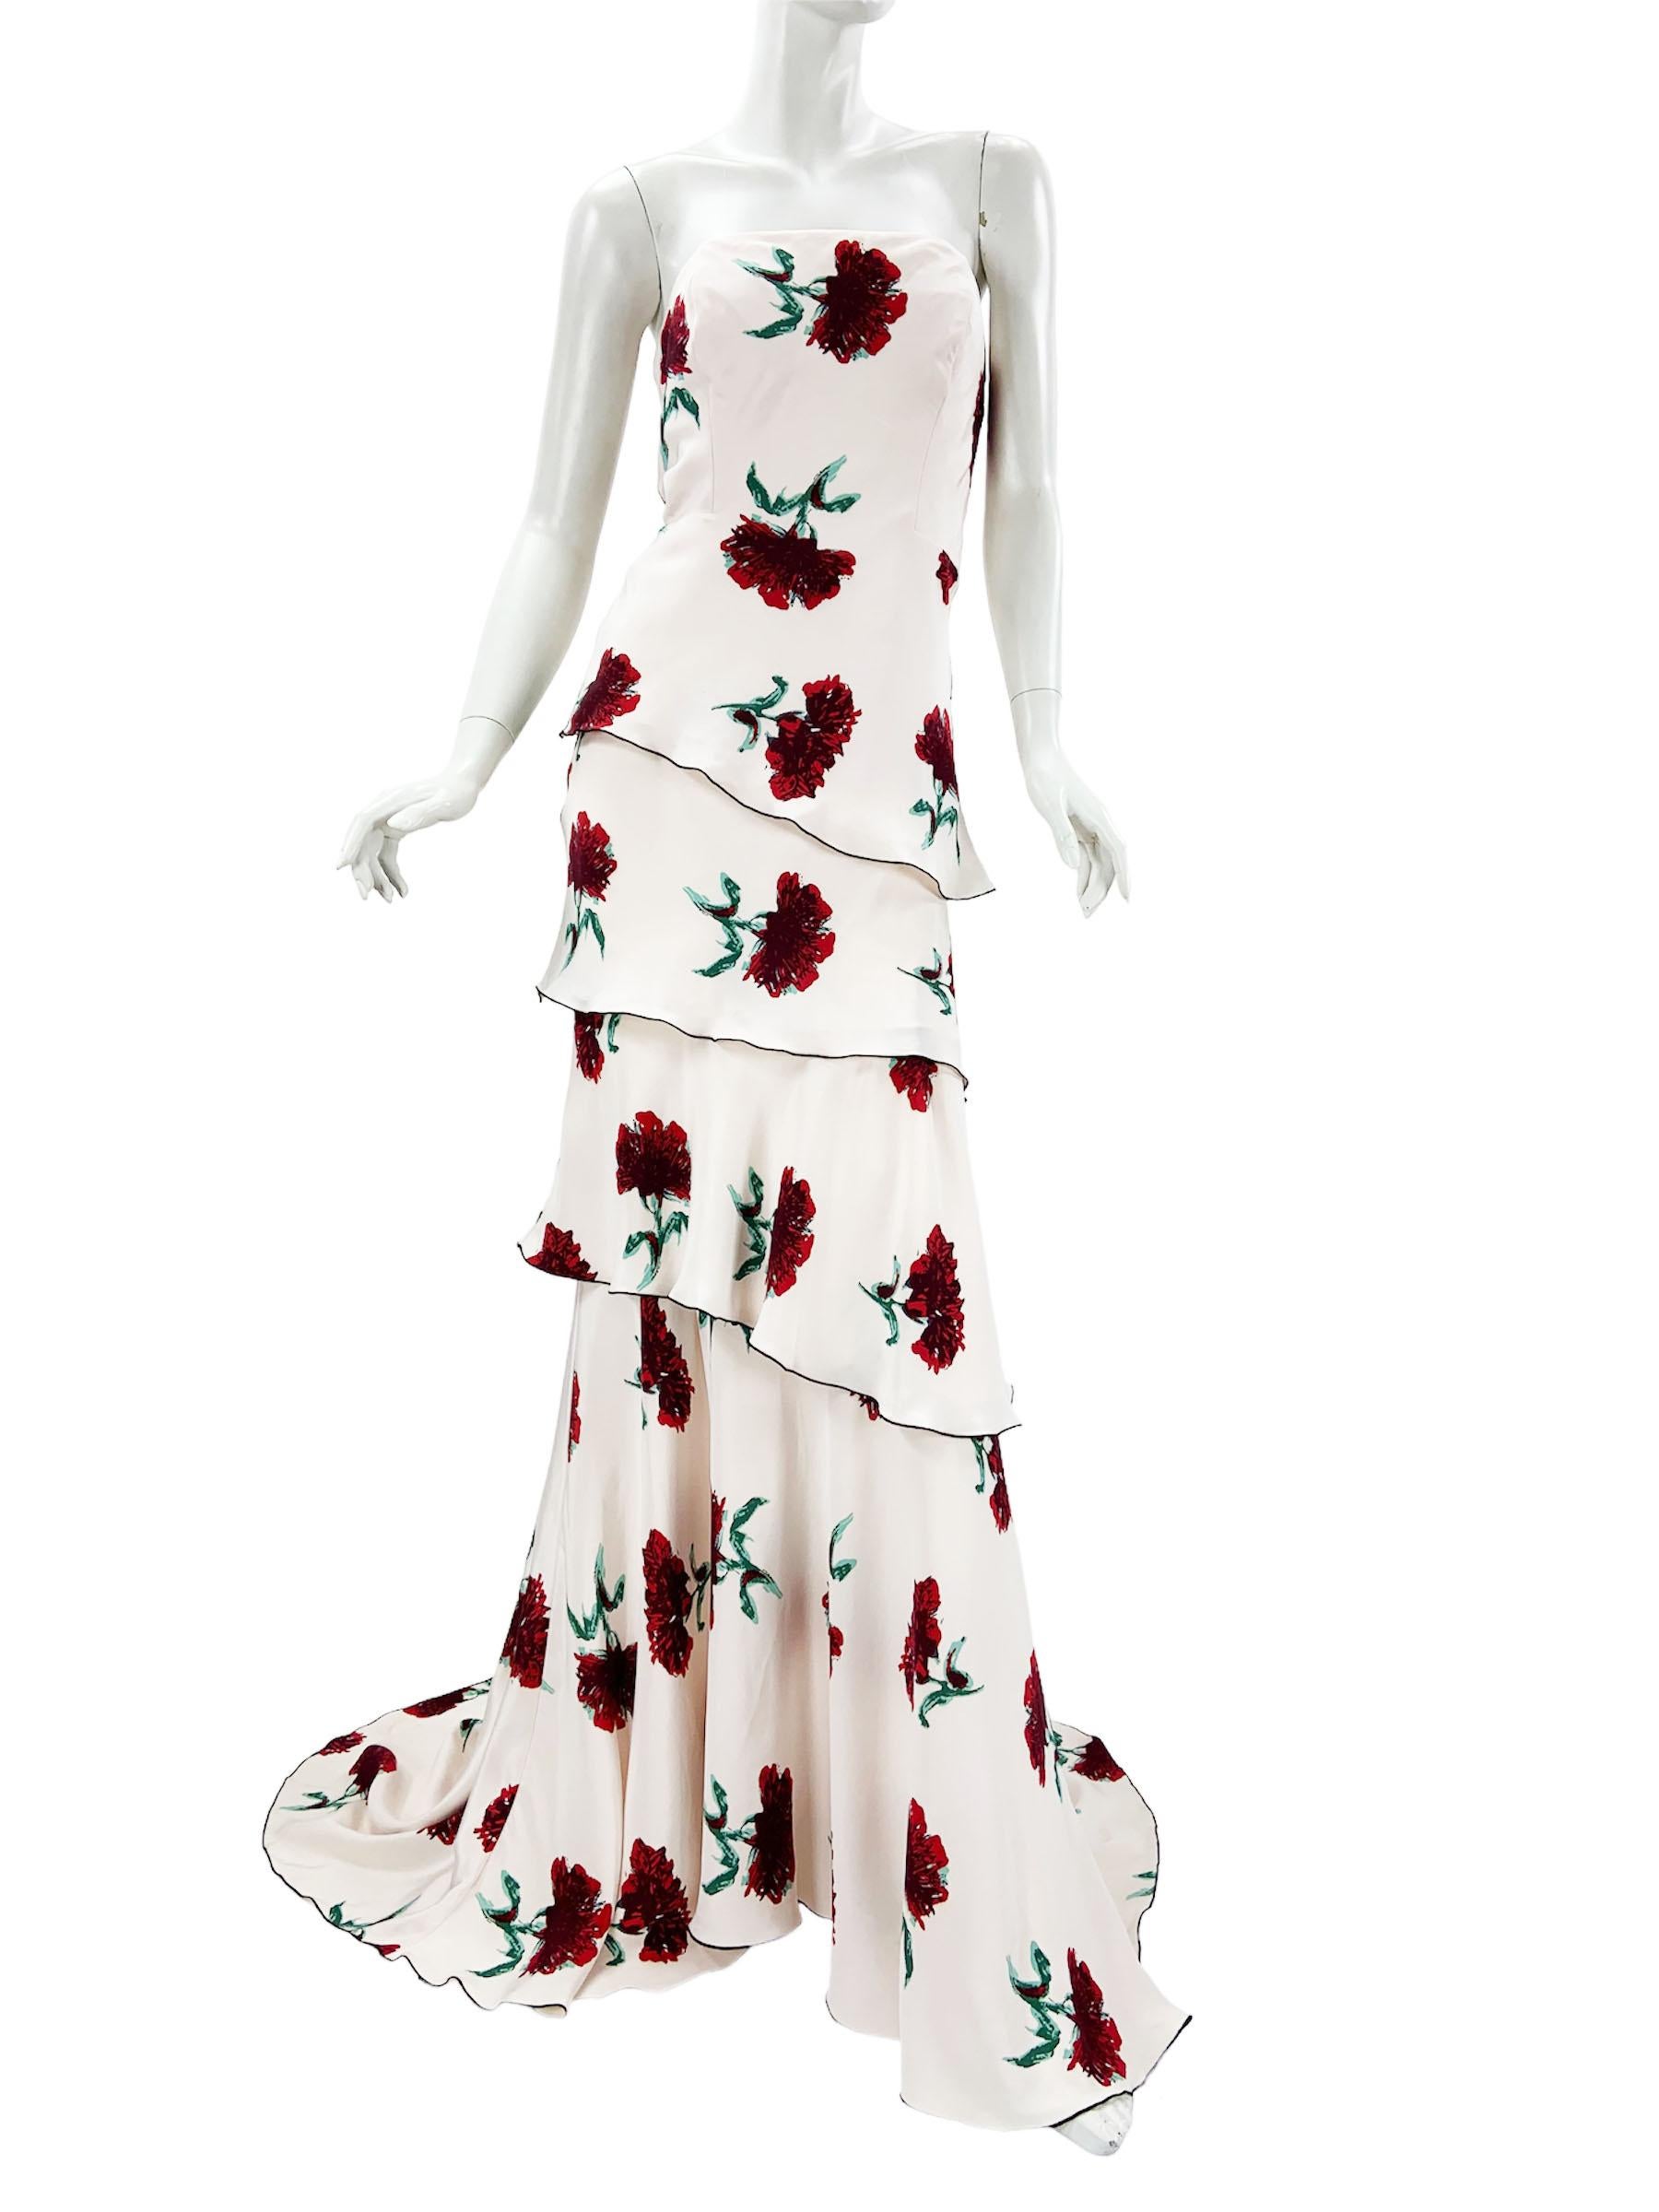 Oscar de la Renta Runway Silk White Floral Print Layered Corset Dress Gown US 6 In Good Condition For Sale In Montgomery, TX